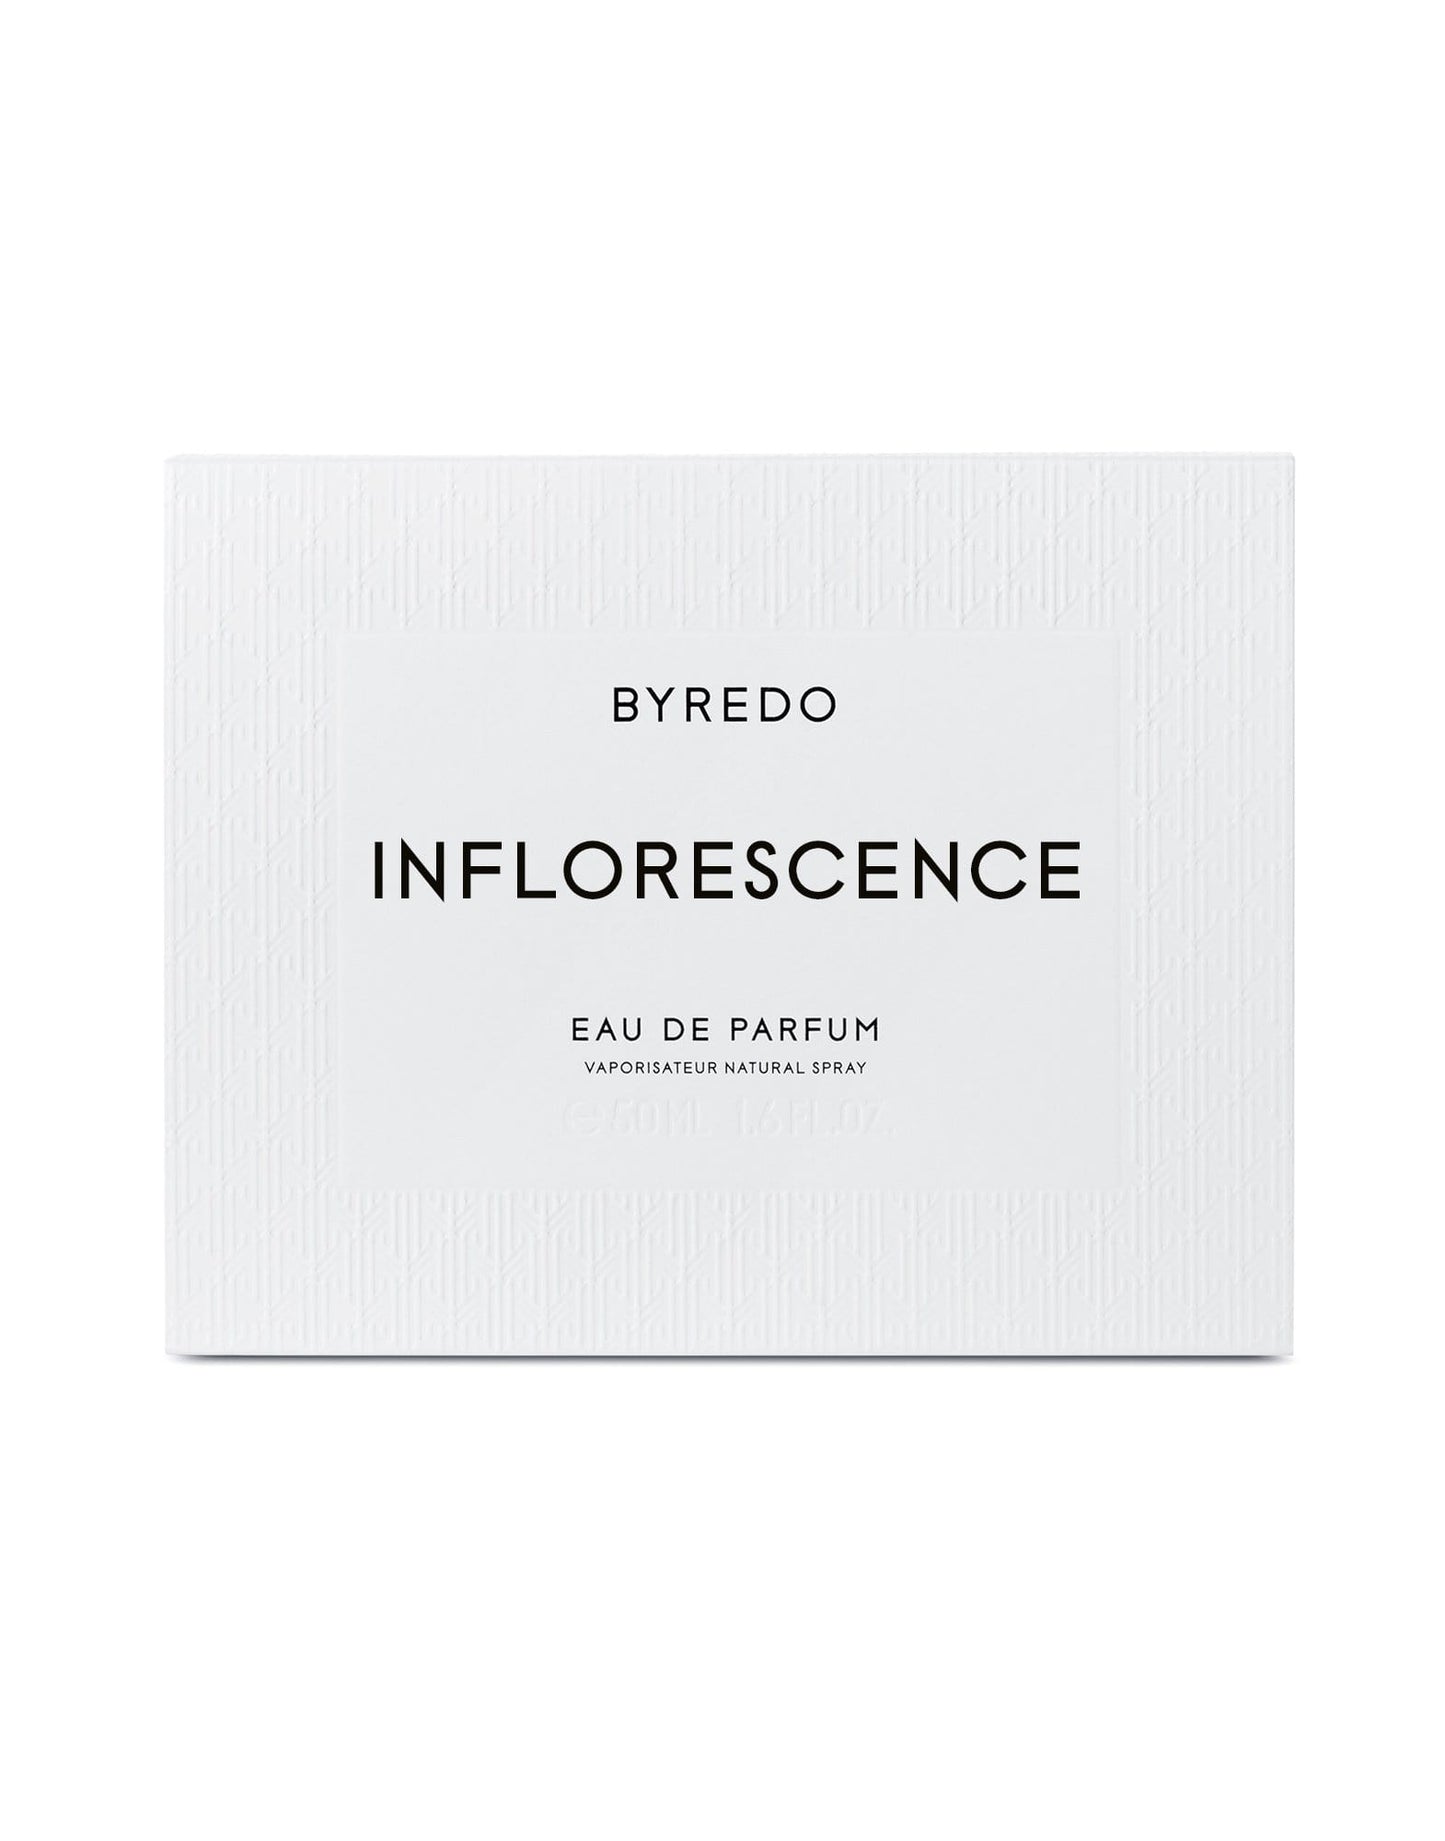 BYREDO-Inflorescence 50ml-INFLORES